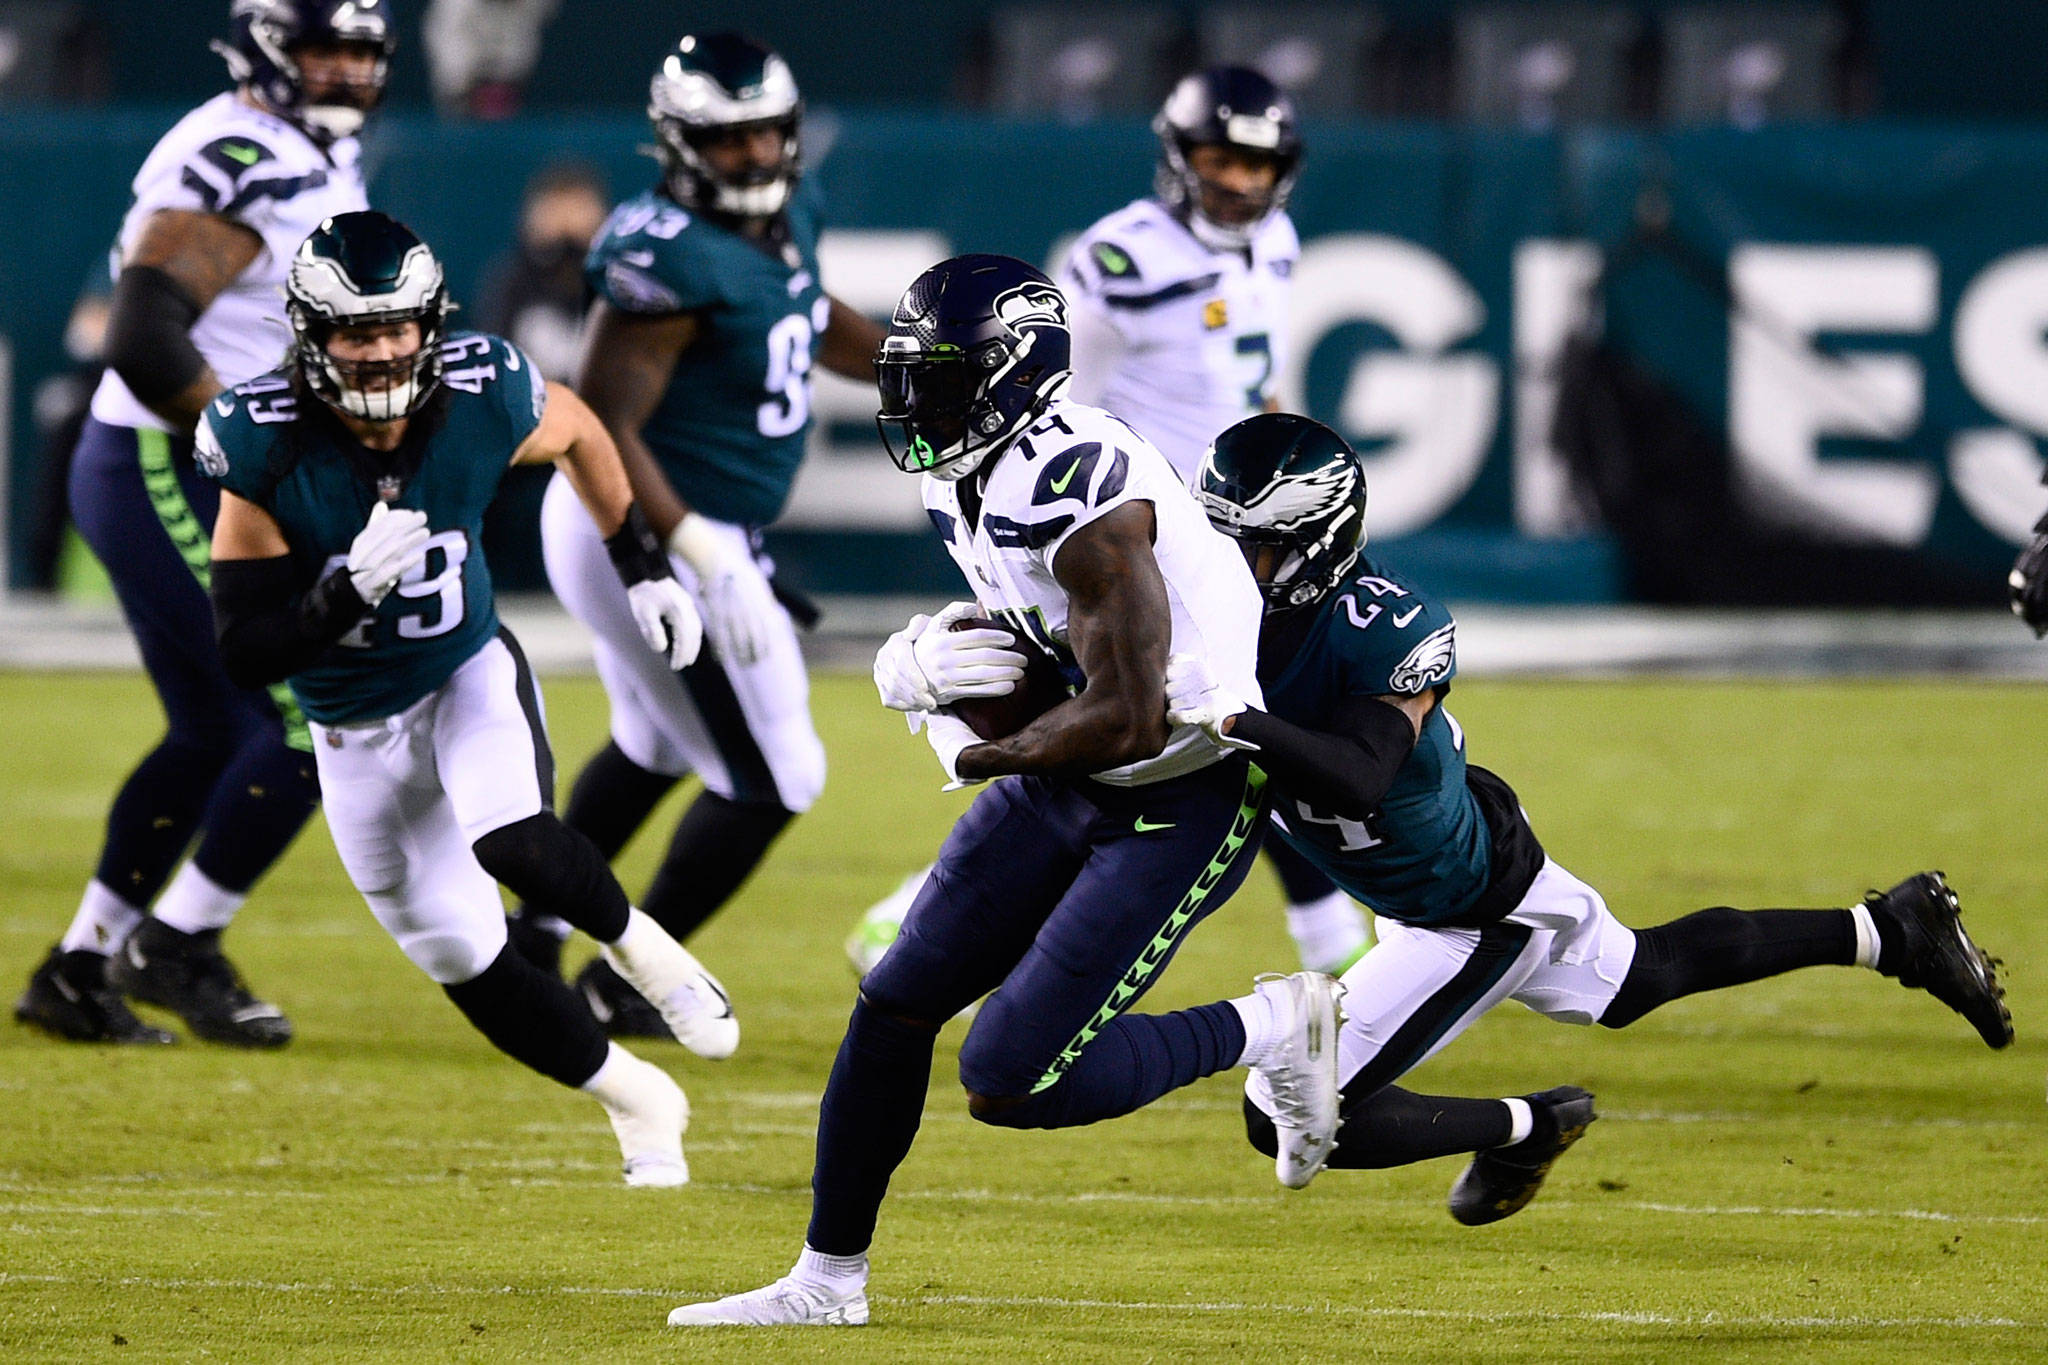 The Seahawks’ DK Metcalf (center) is tackled by the Eagles’ Darius Slay during the first half of a game Nov. 30, 2020, in Philadelphia. (AP Photo/Derik Hamilton)